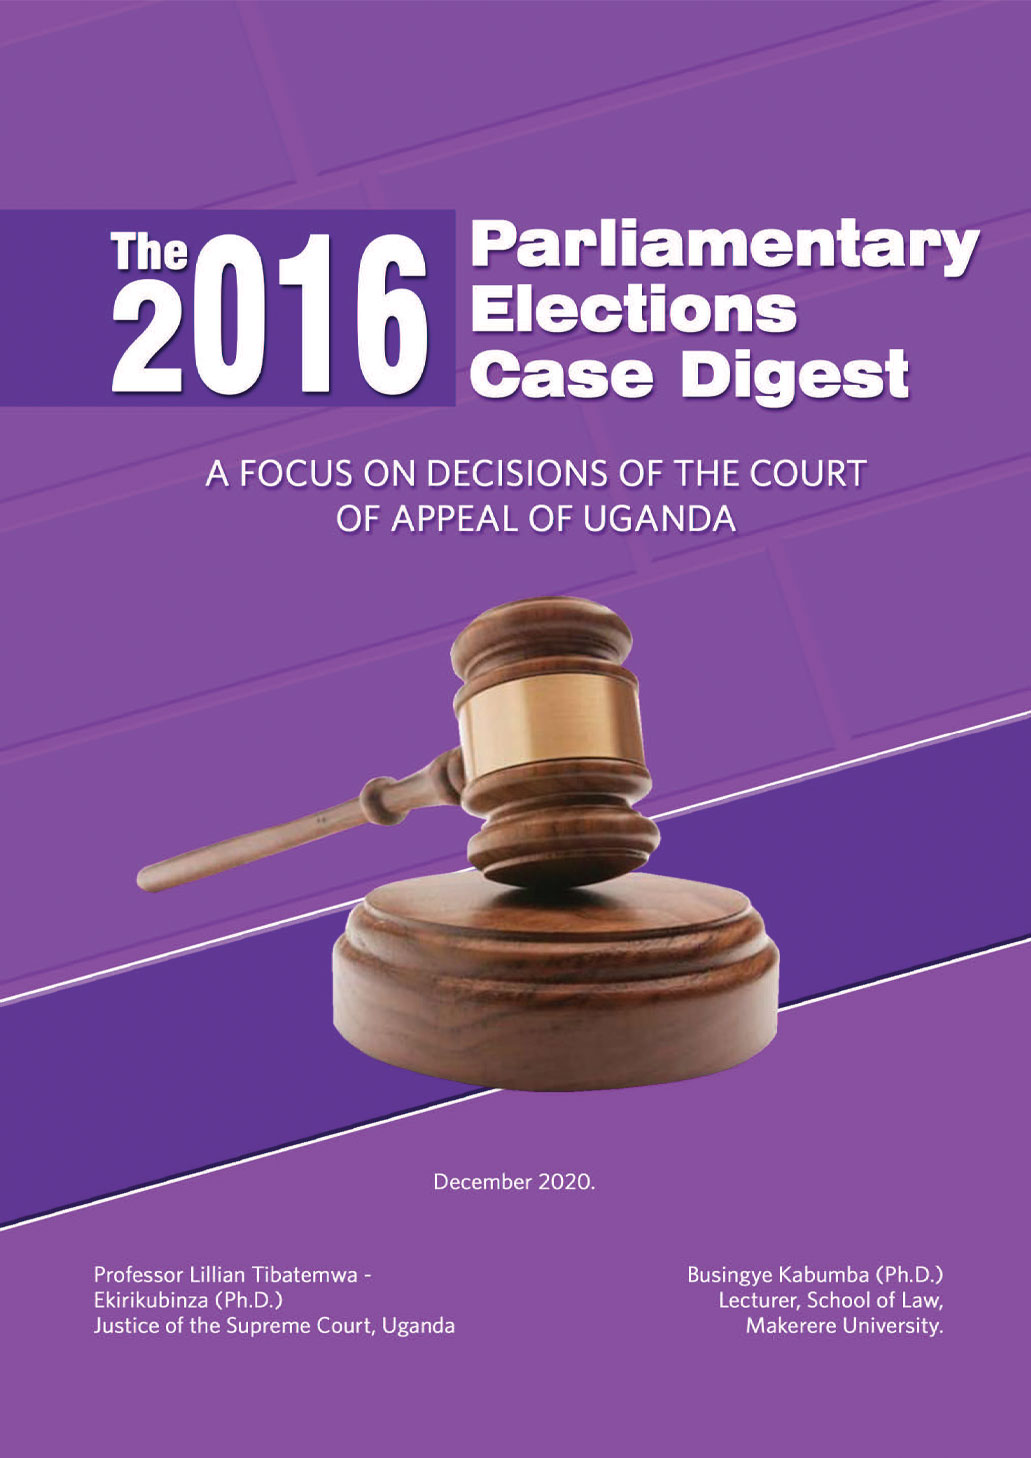 The 2016 Parliamentary Election Case Digest. A focus on Decisions of the Court of Appeal of Uganda